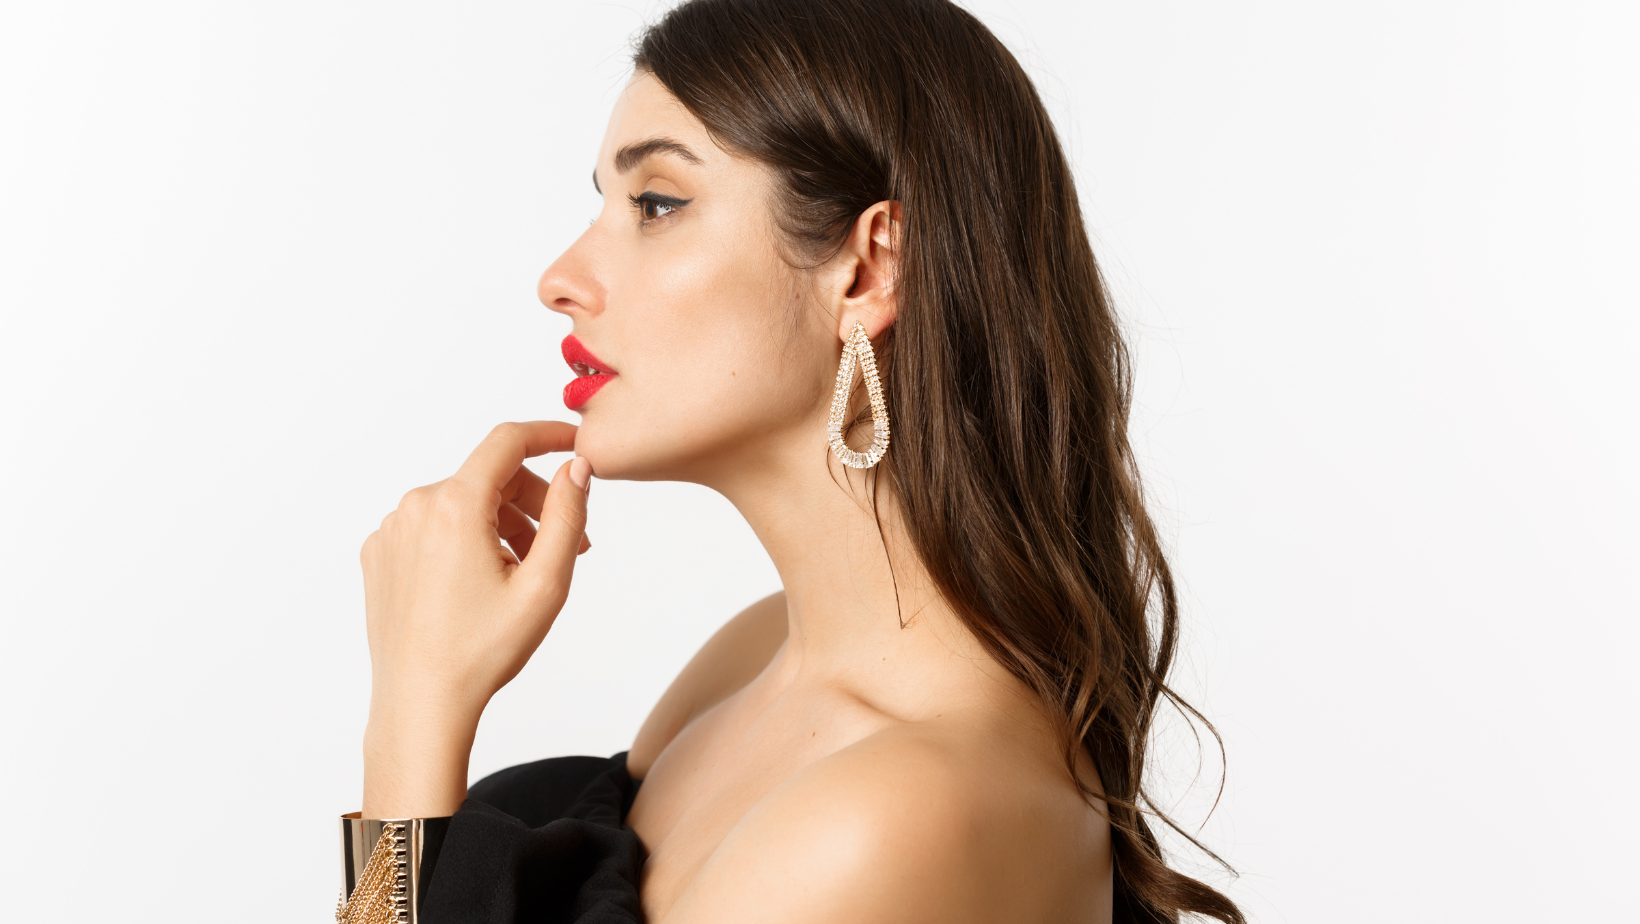 How to Clean and Care for Your Earrings to Keep Them Sparkling